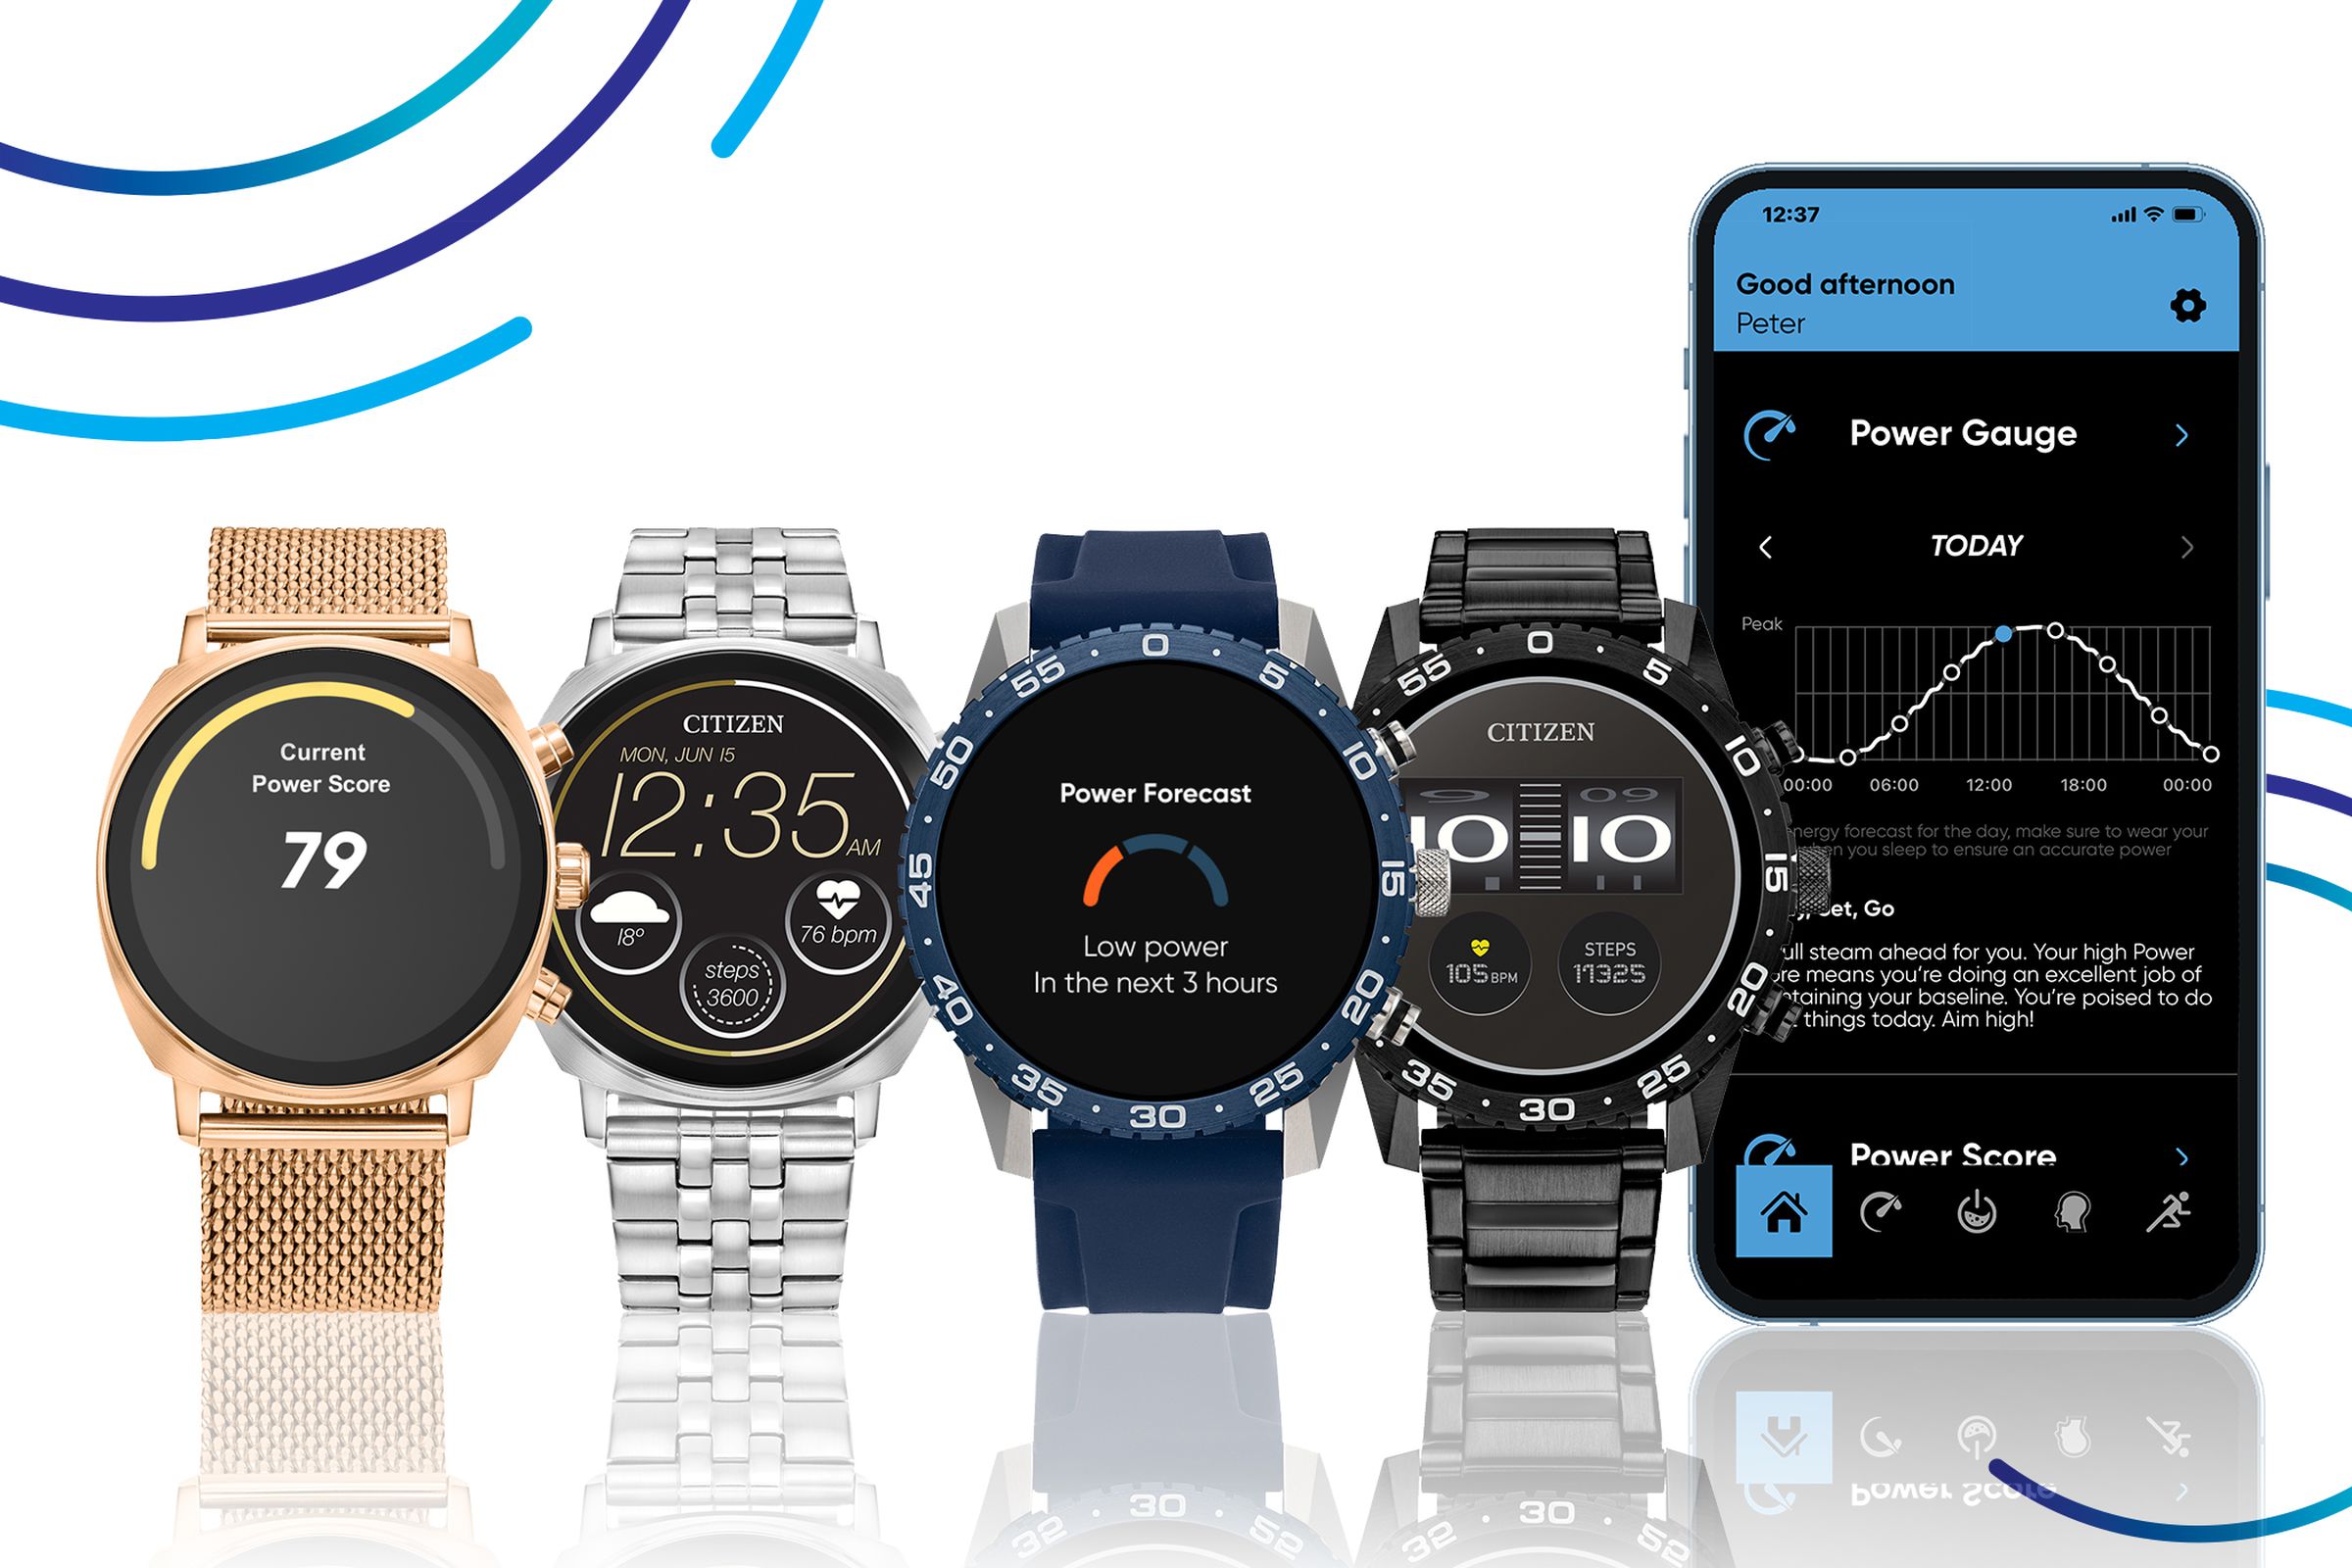 Citizen CZ Smart Casual and Sport models side by side with a screenshot of the CZ Smart YouQ app.